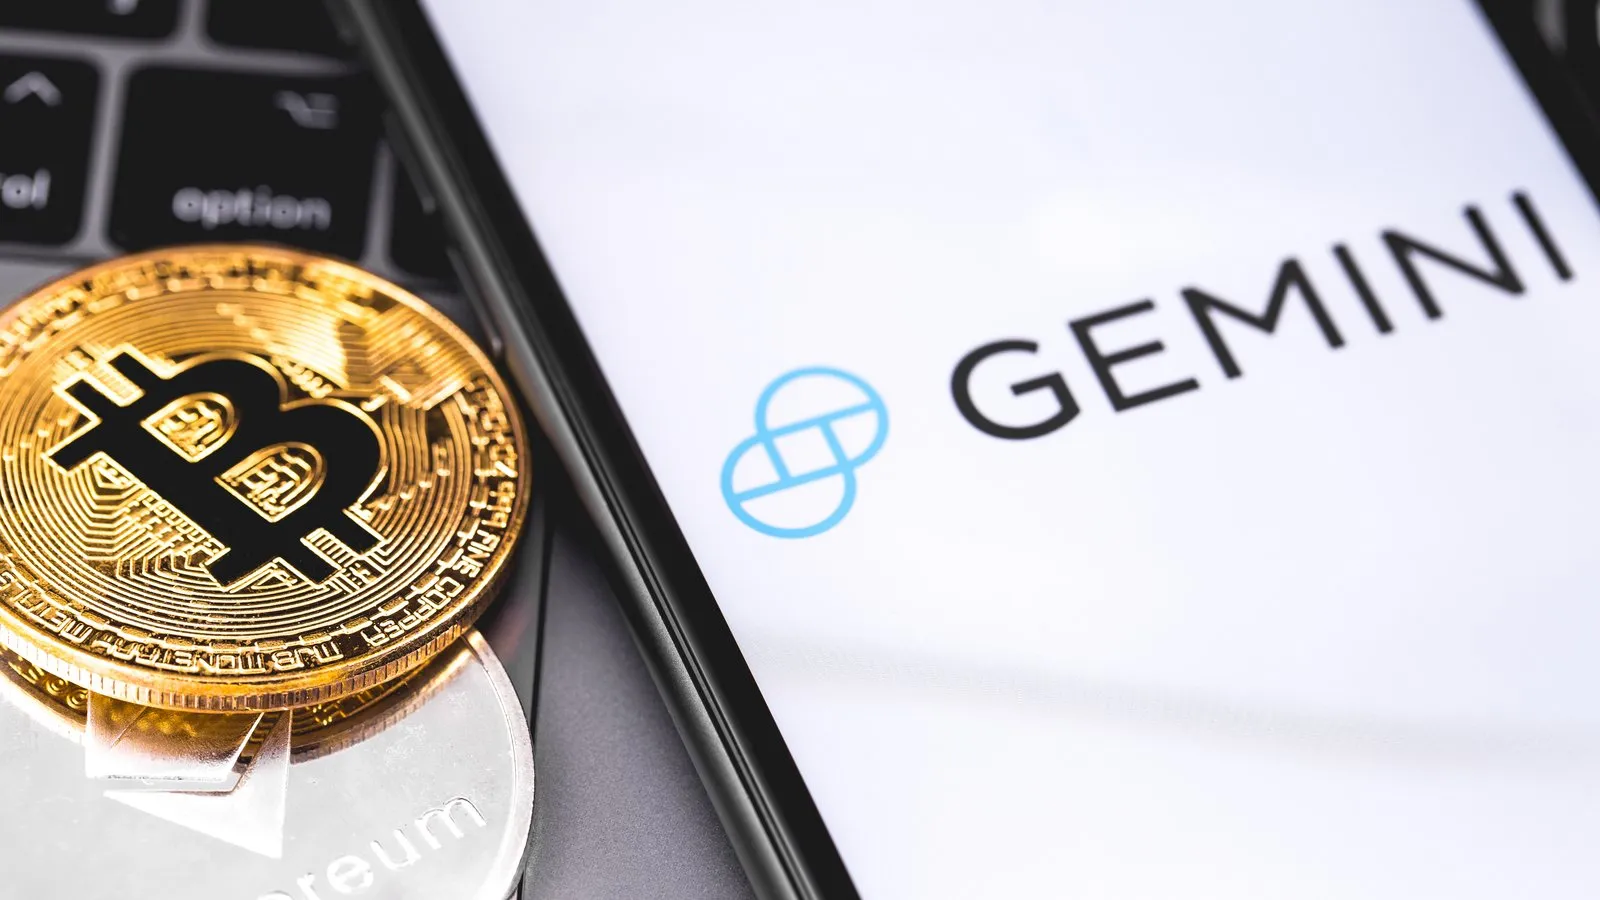 Gemini is crypto exchange based in the United States. Image: Shutterstock.